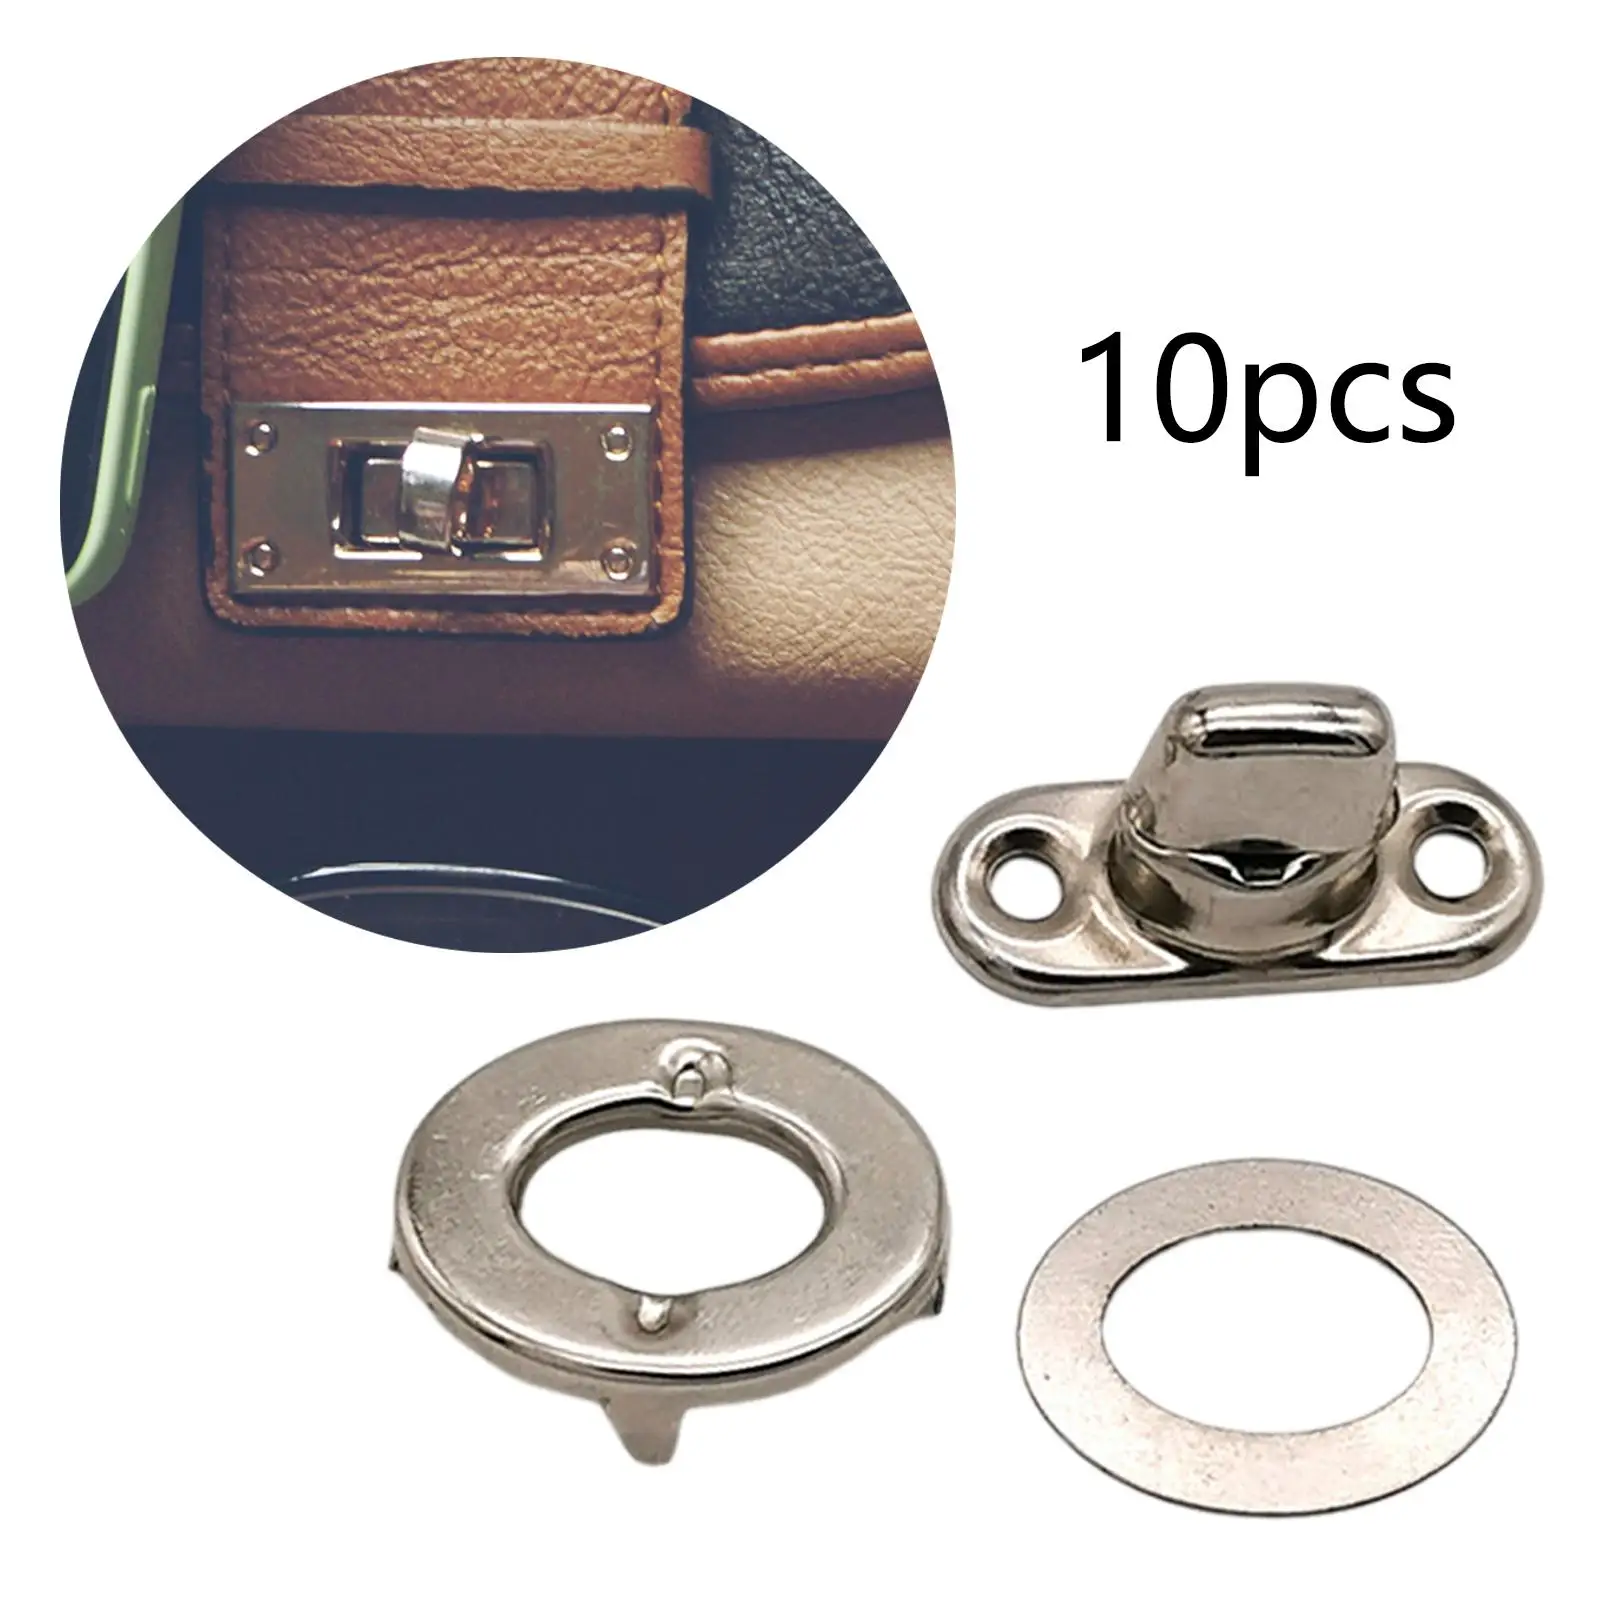 10Pcs Alloy Rotary Button Bag Twist Lock Decoration Buckles Durtable Box Catch latches for Craft Boxes Luggage Drawer Furniture